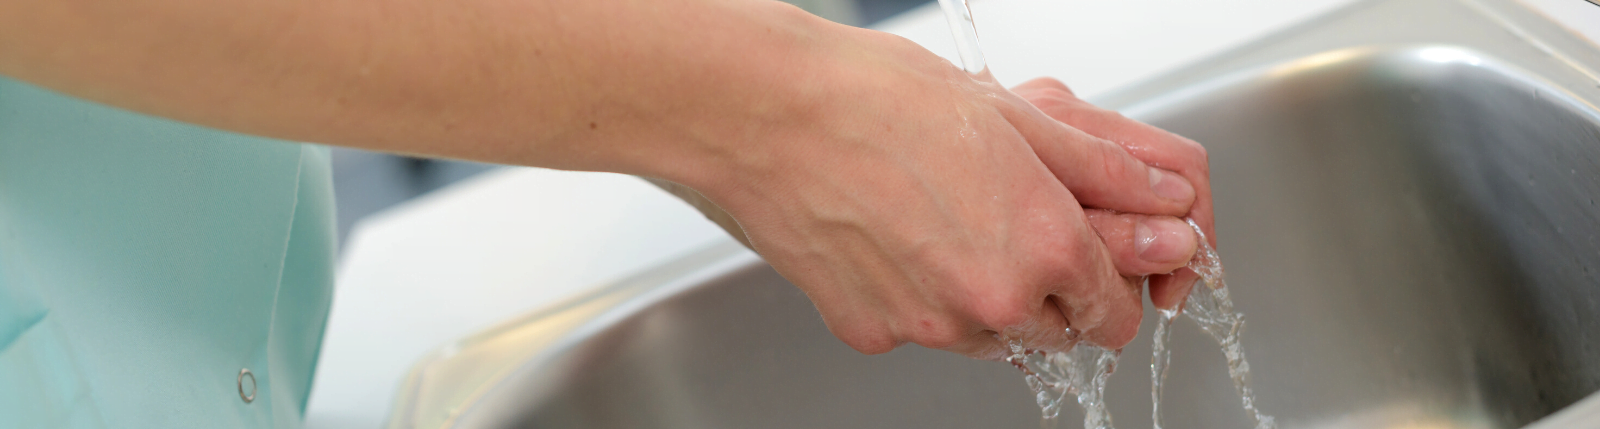 doctor washing hands during covid-19 outbreak